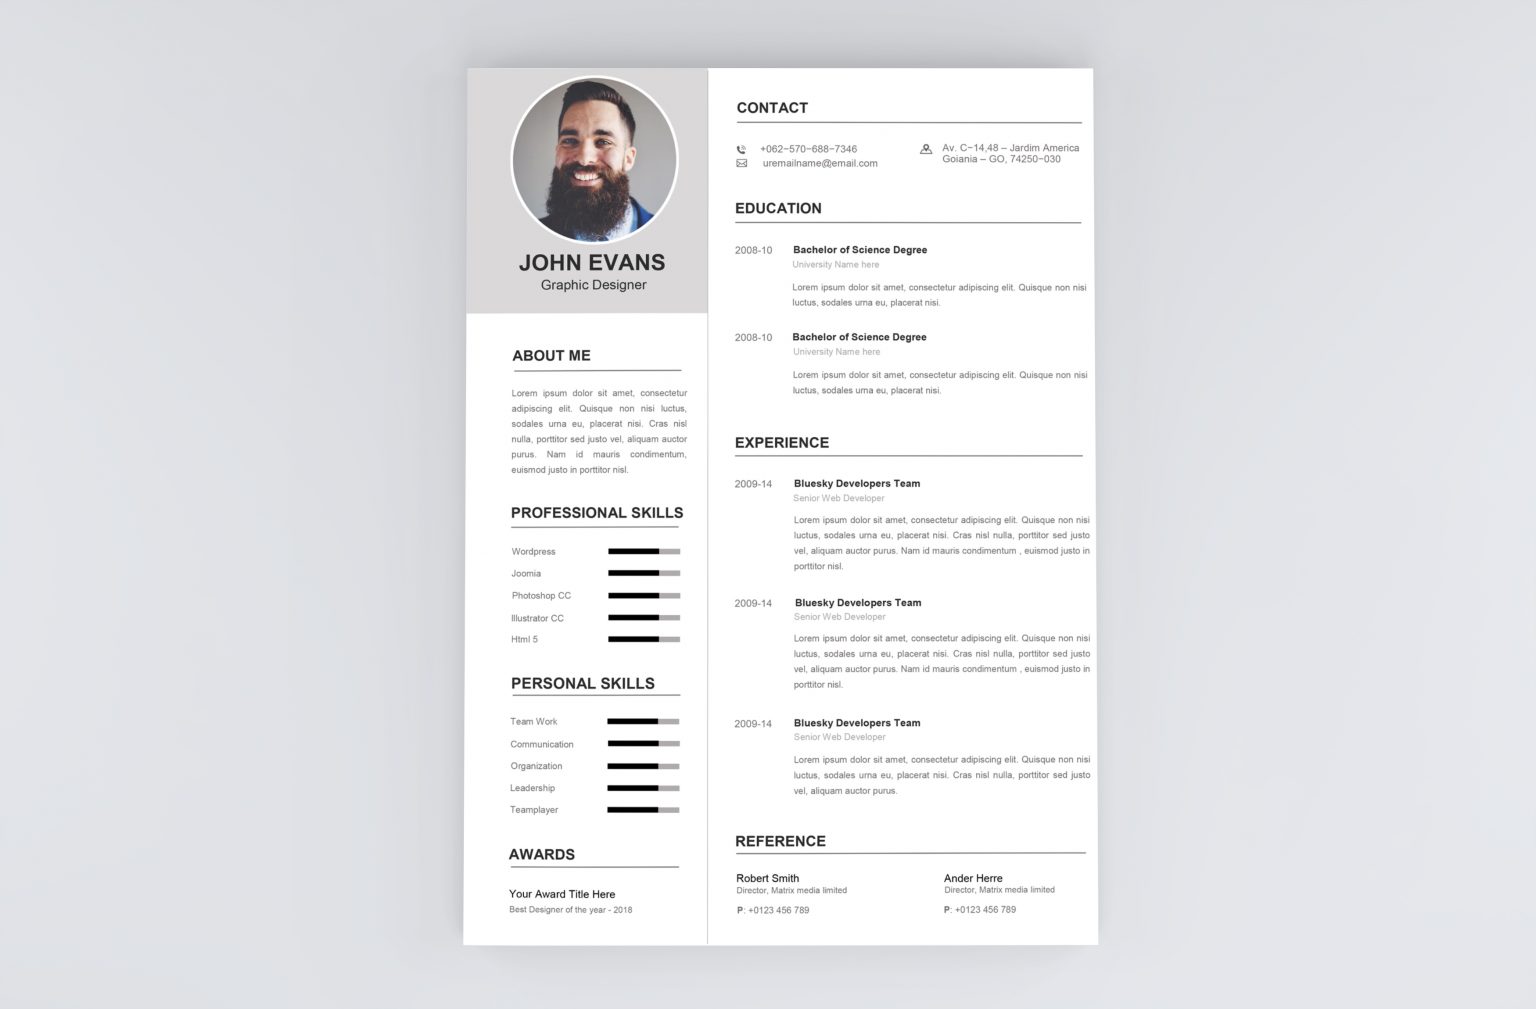 resume format 2021 examples